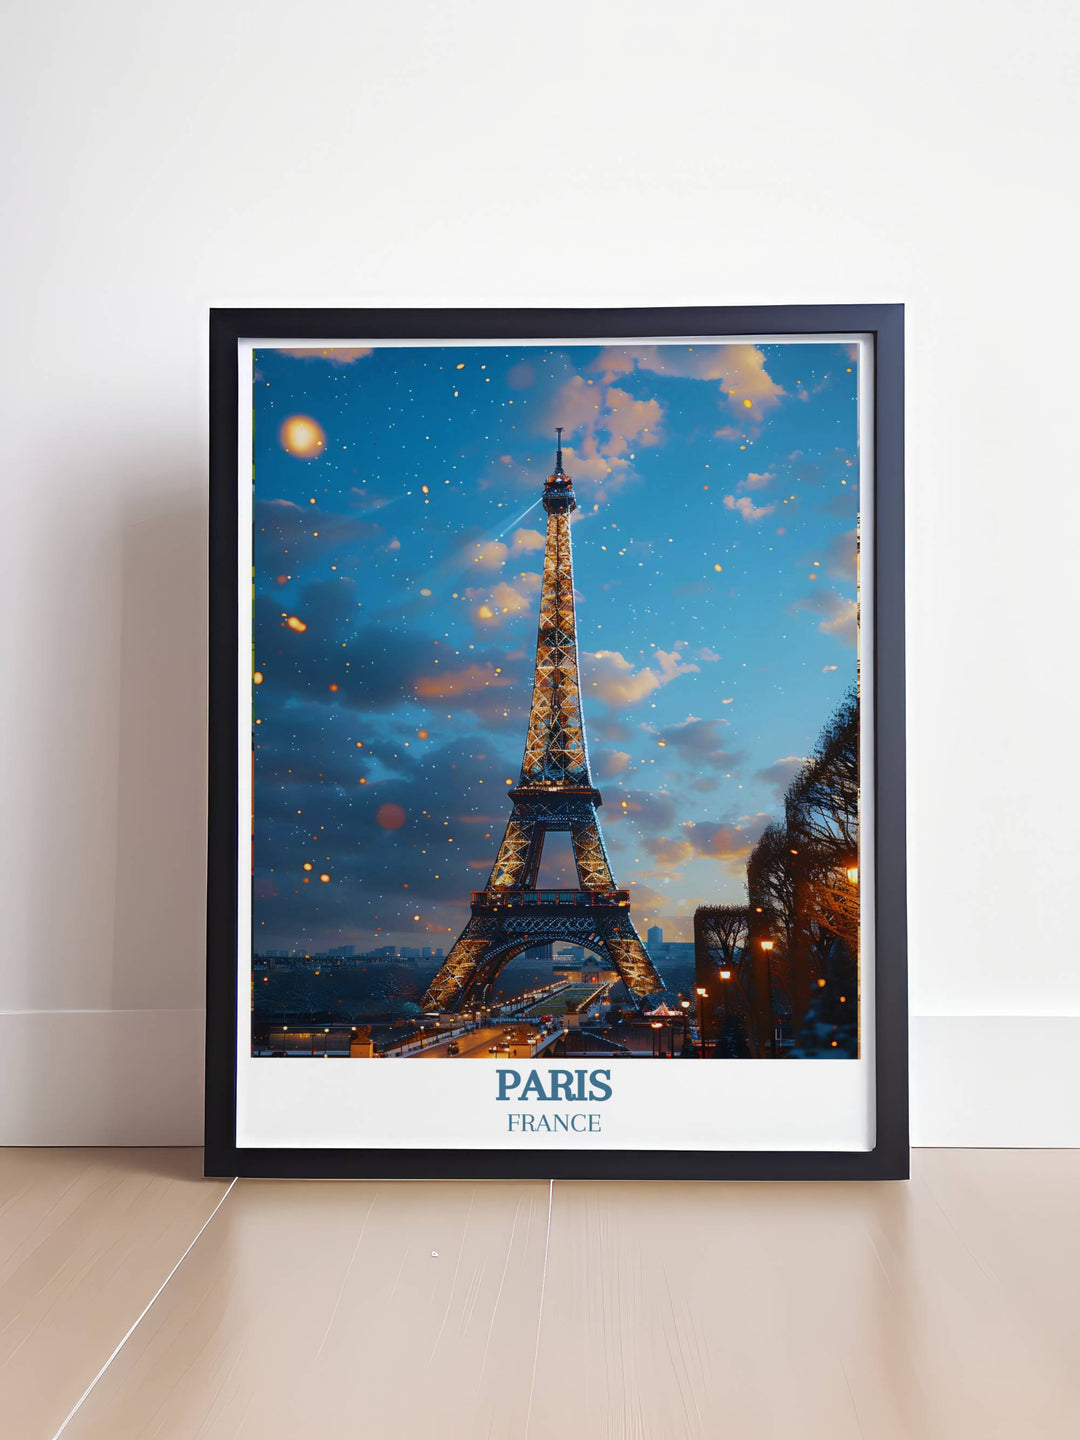 Celebrate French culture with our France Framed Art collection, showcasing diverse scenes and landscapes from across the country.